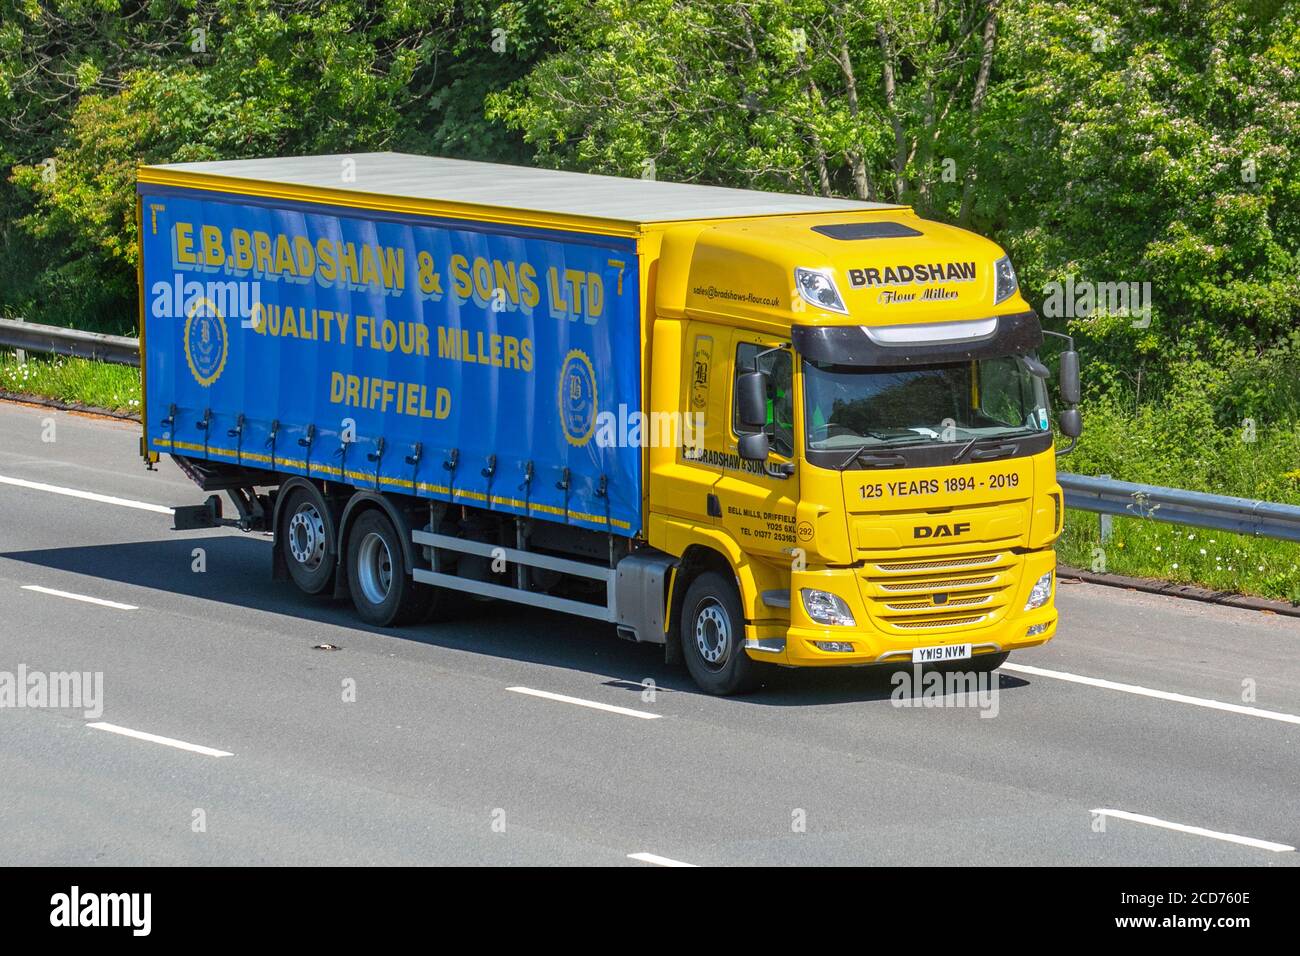 Eb Bradshaw & Sons Ltd; Haulage delivery trucks,Flour Millers lorry, transportation, truck, cargo carrier, yellow DAF CF vehicle, European commercial transport industry HGV, M6 at Manchester, UK Stock Photo